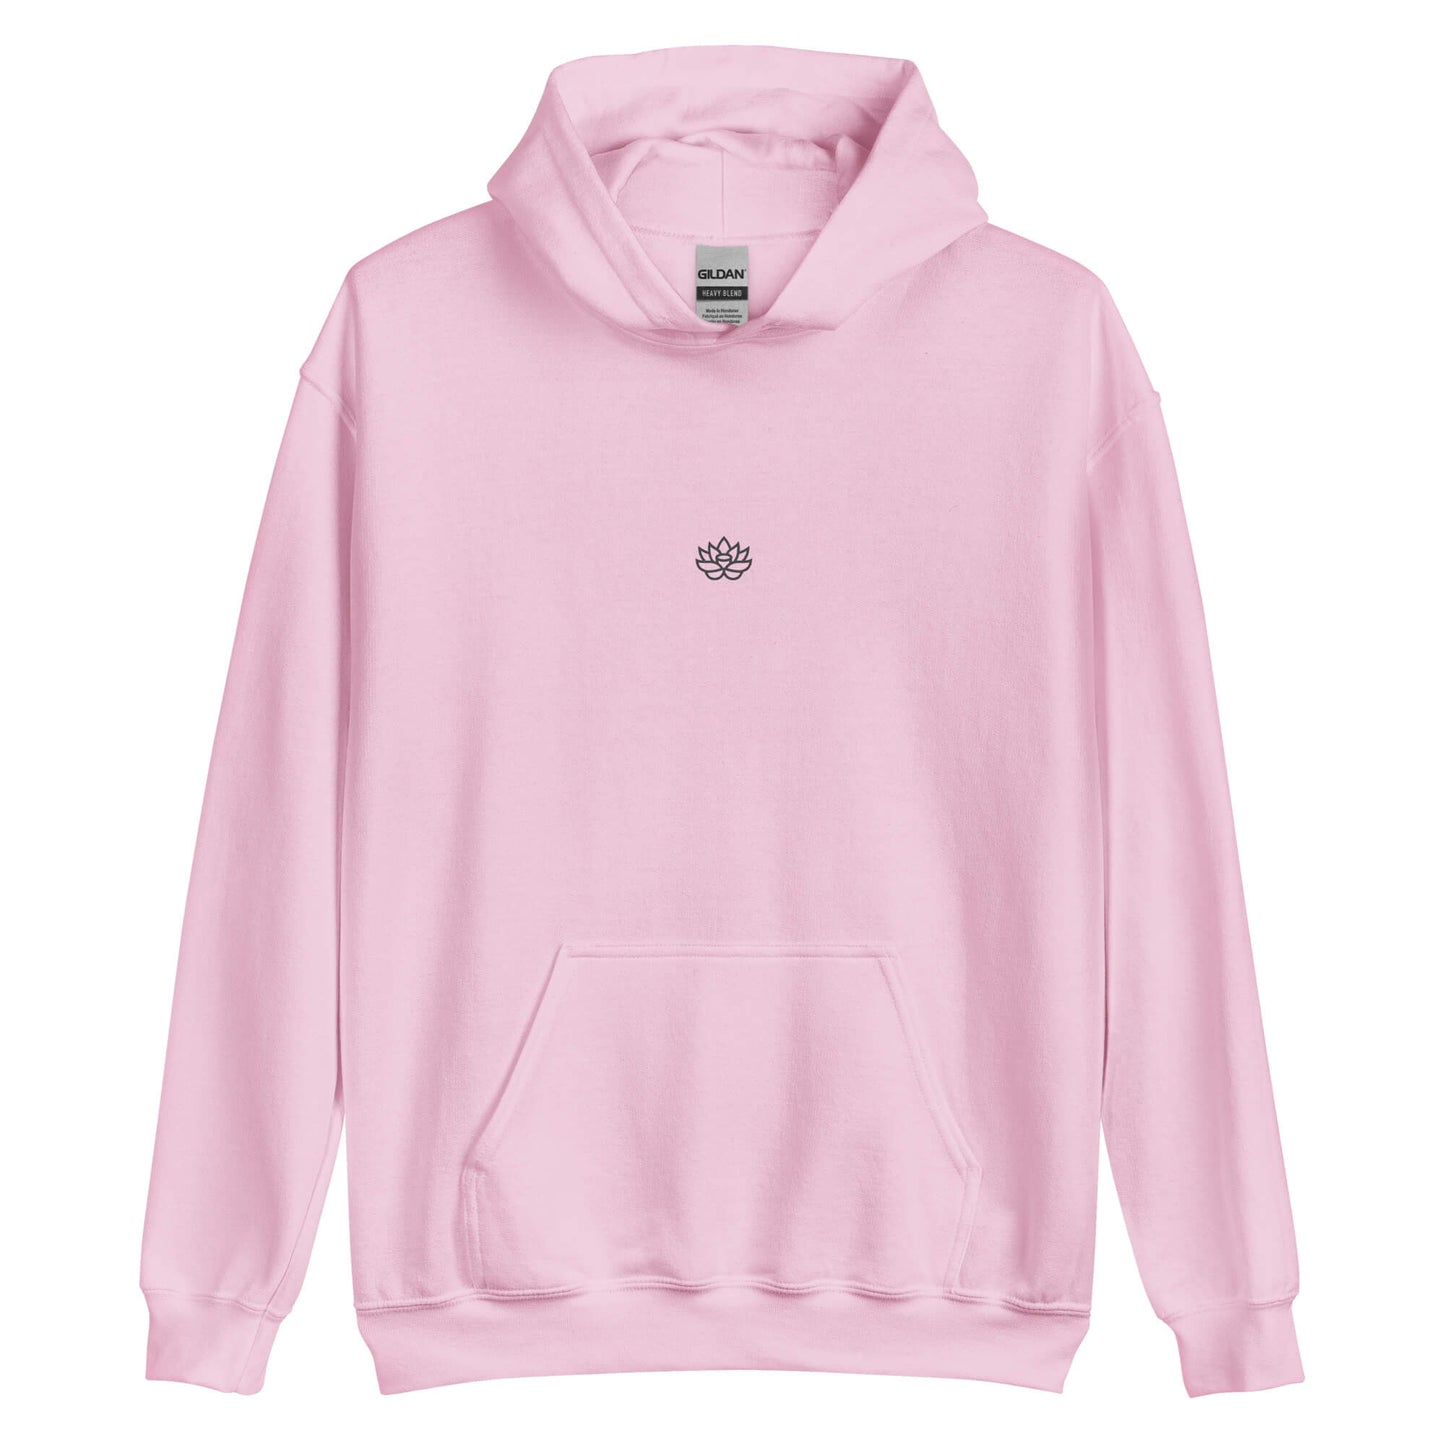 Unisex Heavy Blend Hoodie Light Pink Front with Black Lily